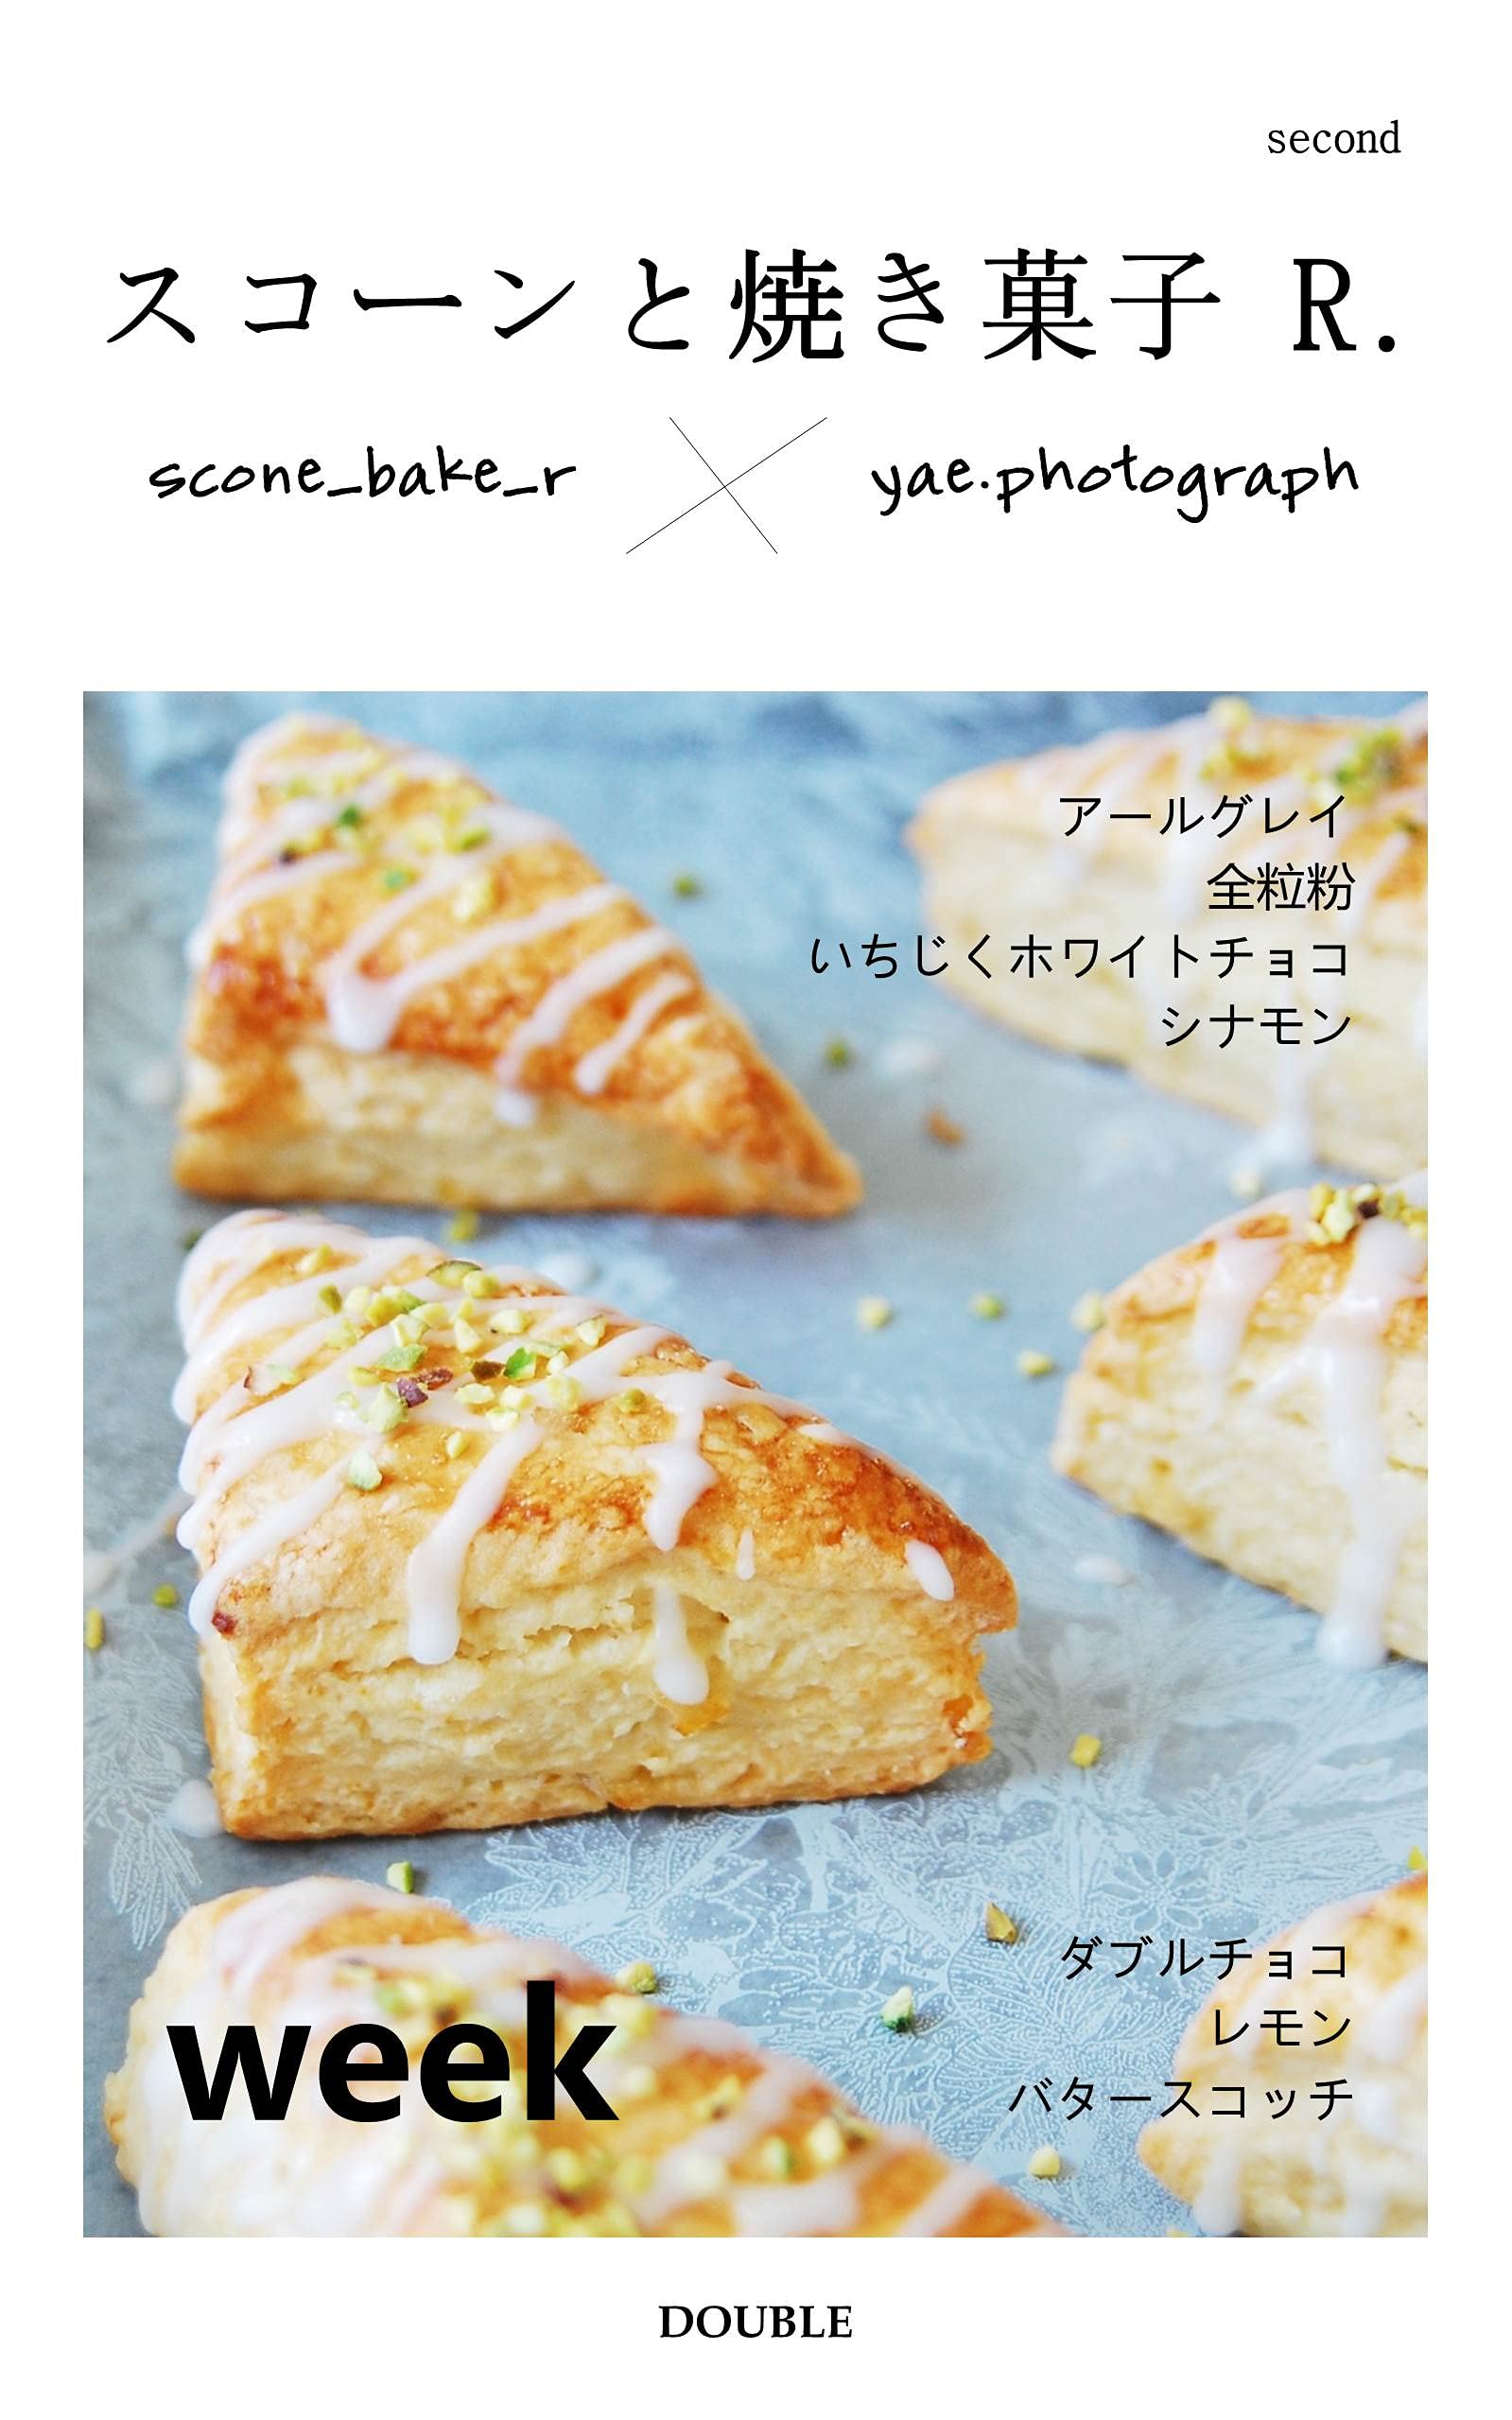 scones and baked r second (Japanese Edition)